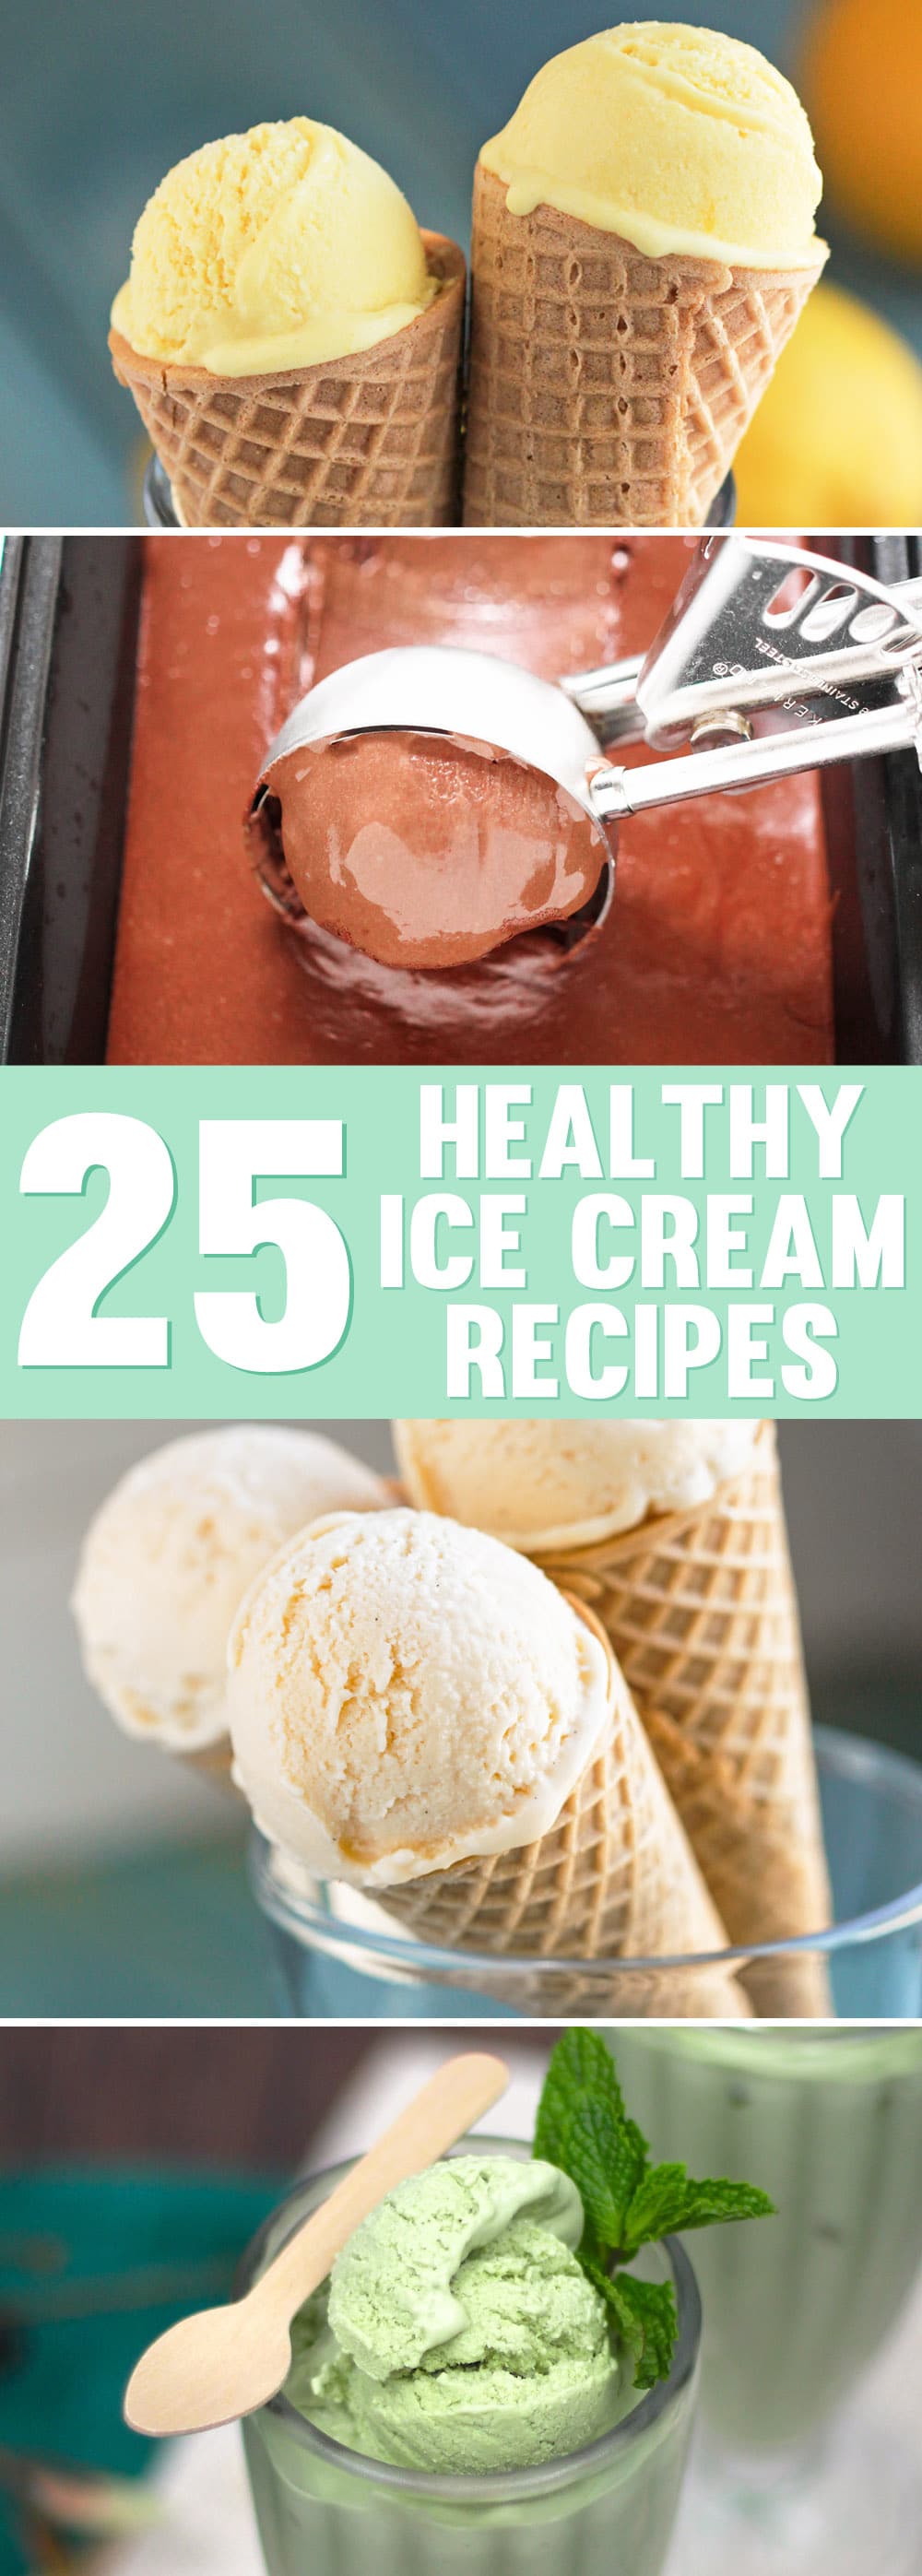 25 Healthy Ice Cream Recipes (low fat, low calorie, high protein)